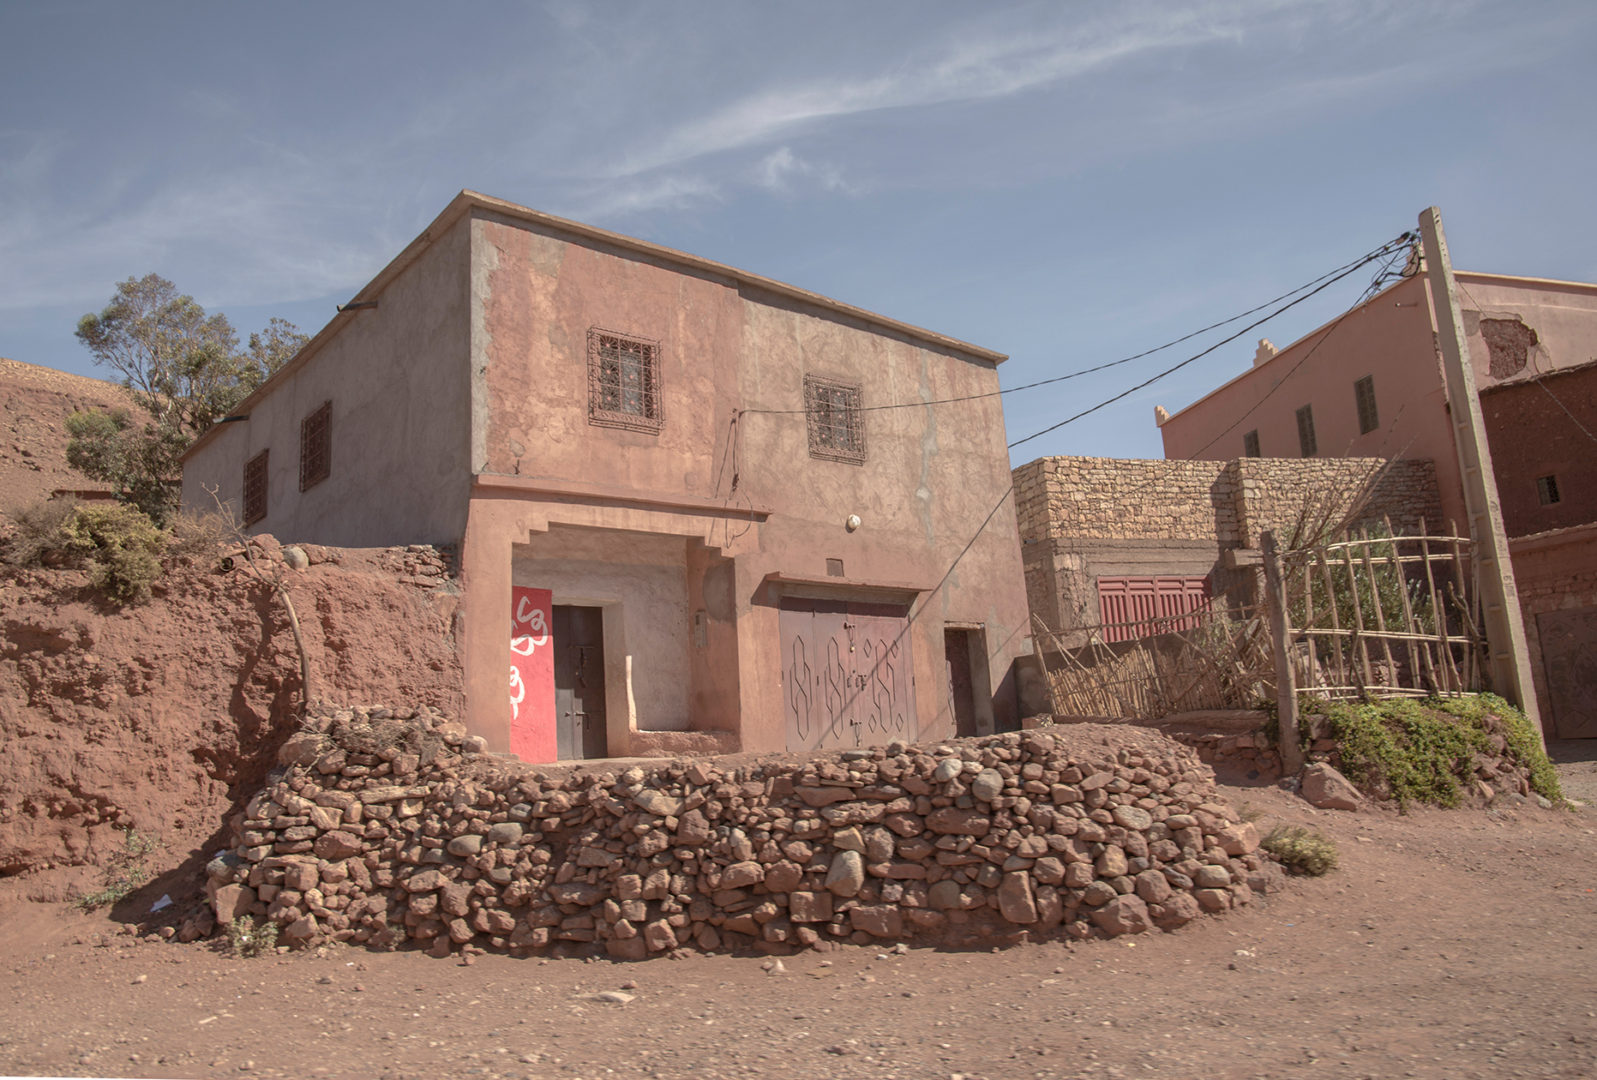 A country house in the Sahara region of Morocco